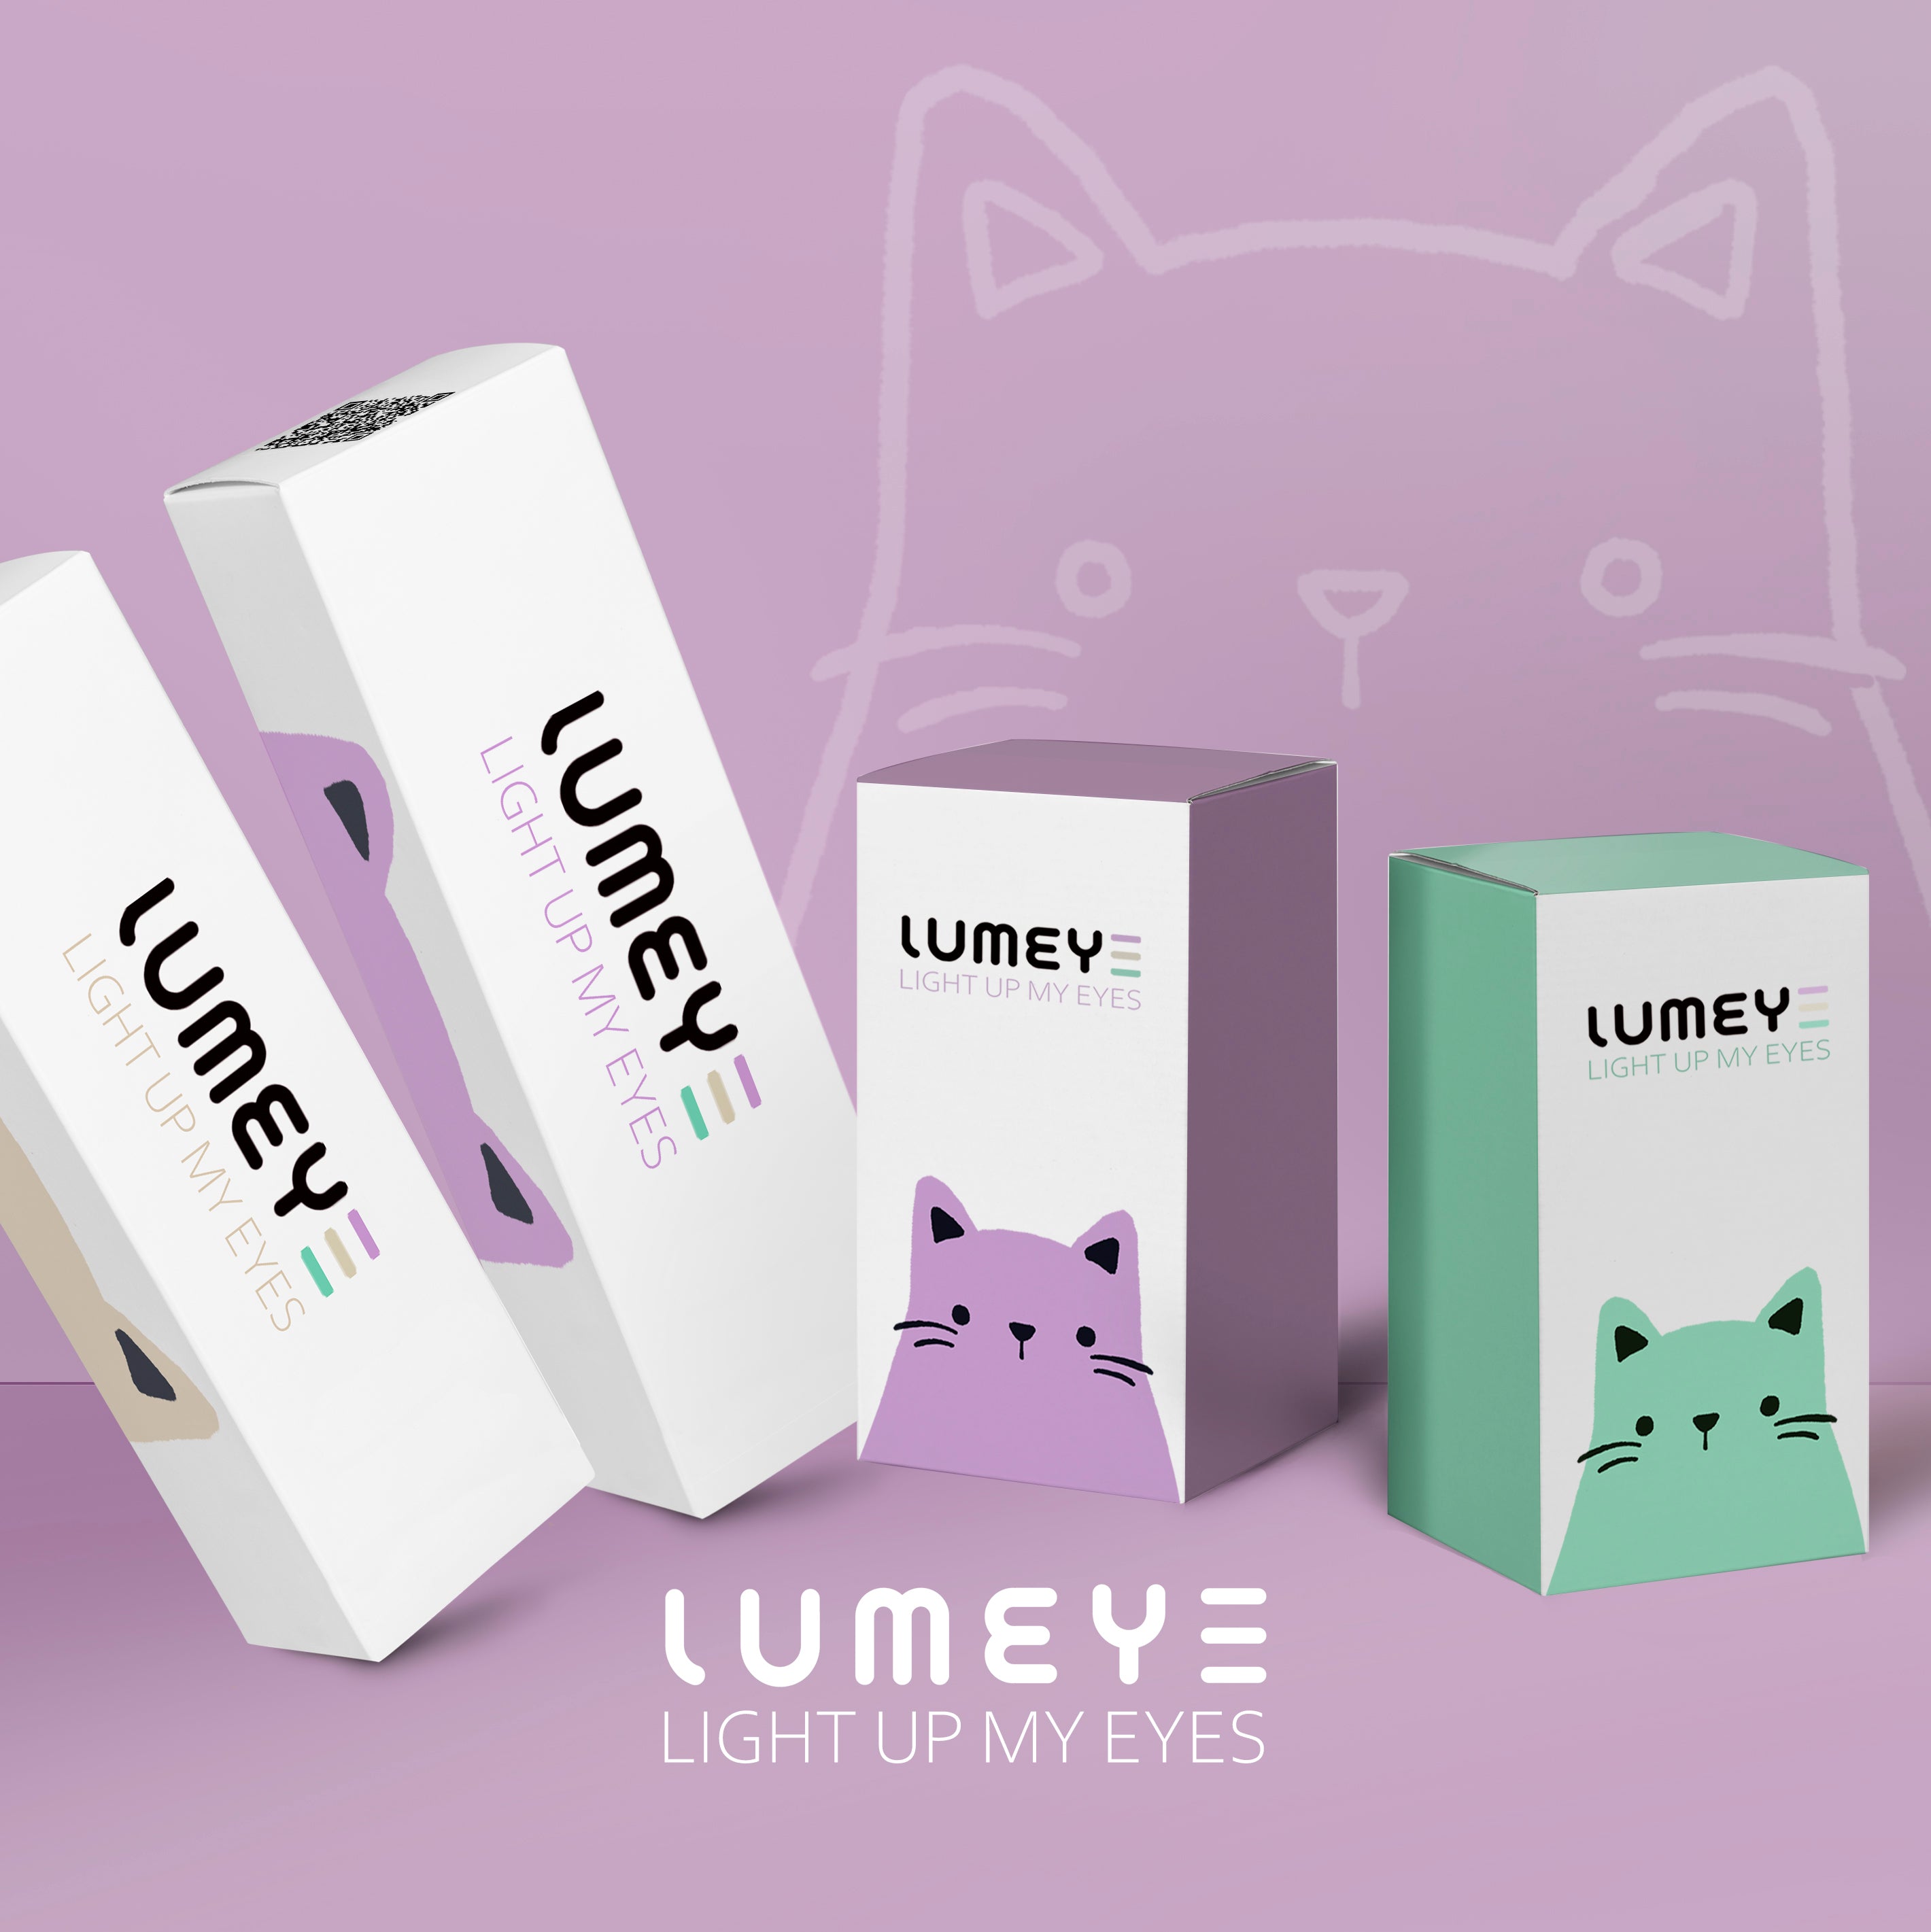 Best COLORED CONTACTS - LUMEYE Juicy Gray Blue Colored Contact Lenses - LUMEYE